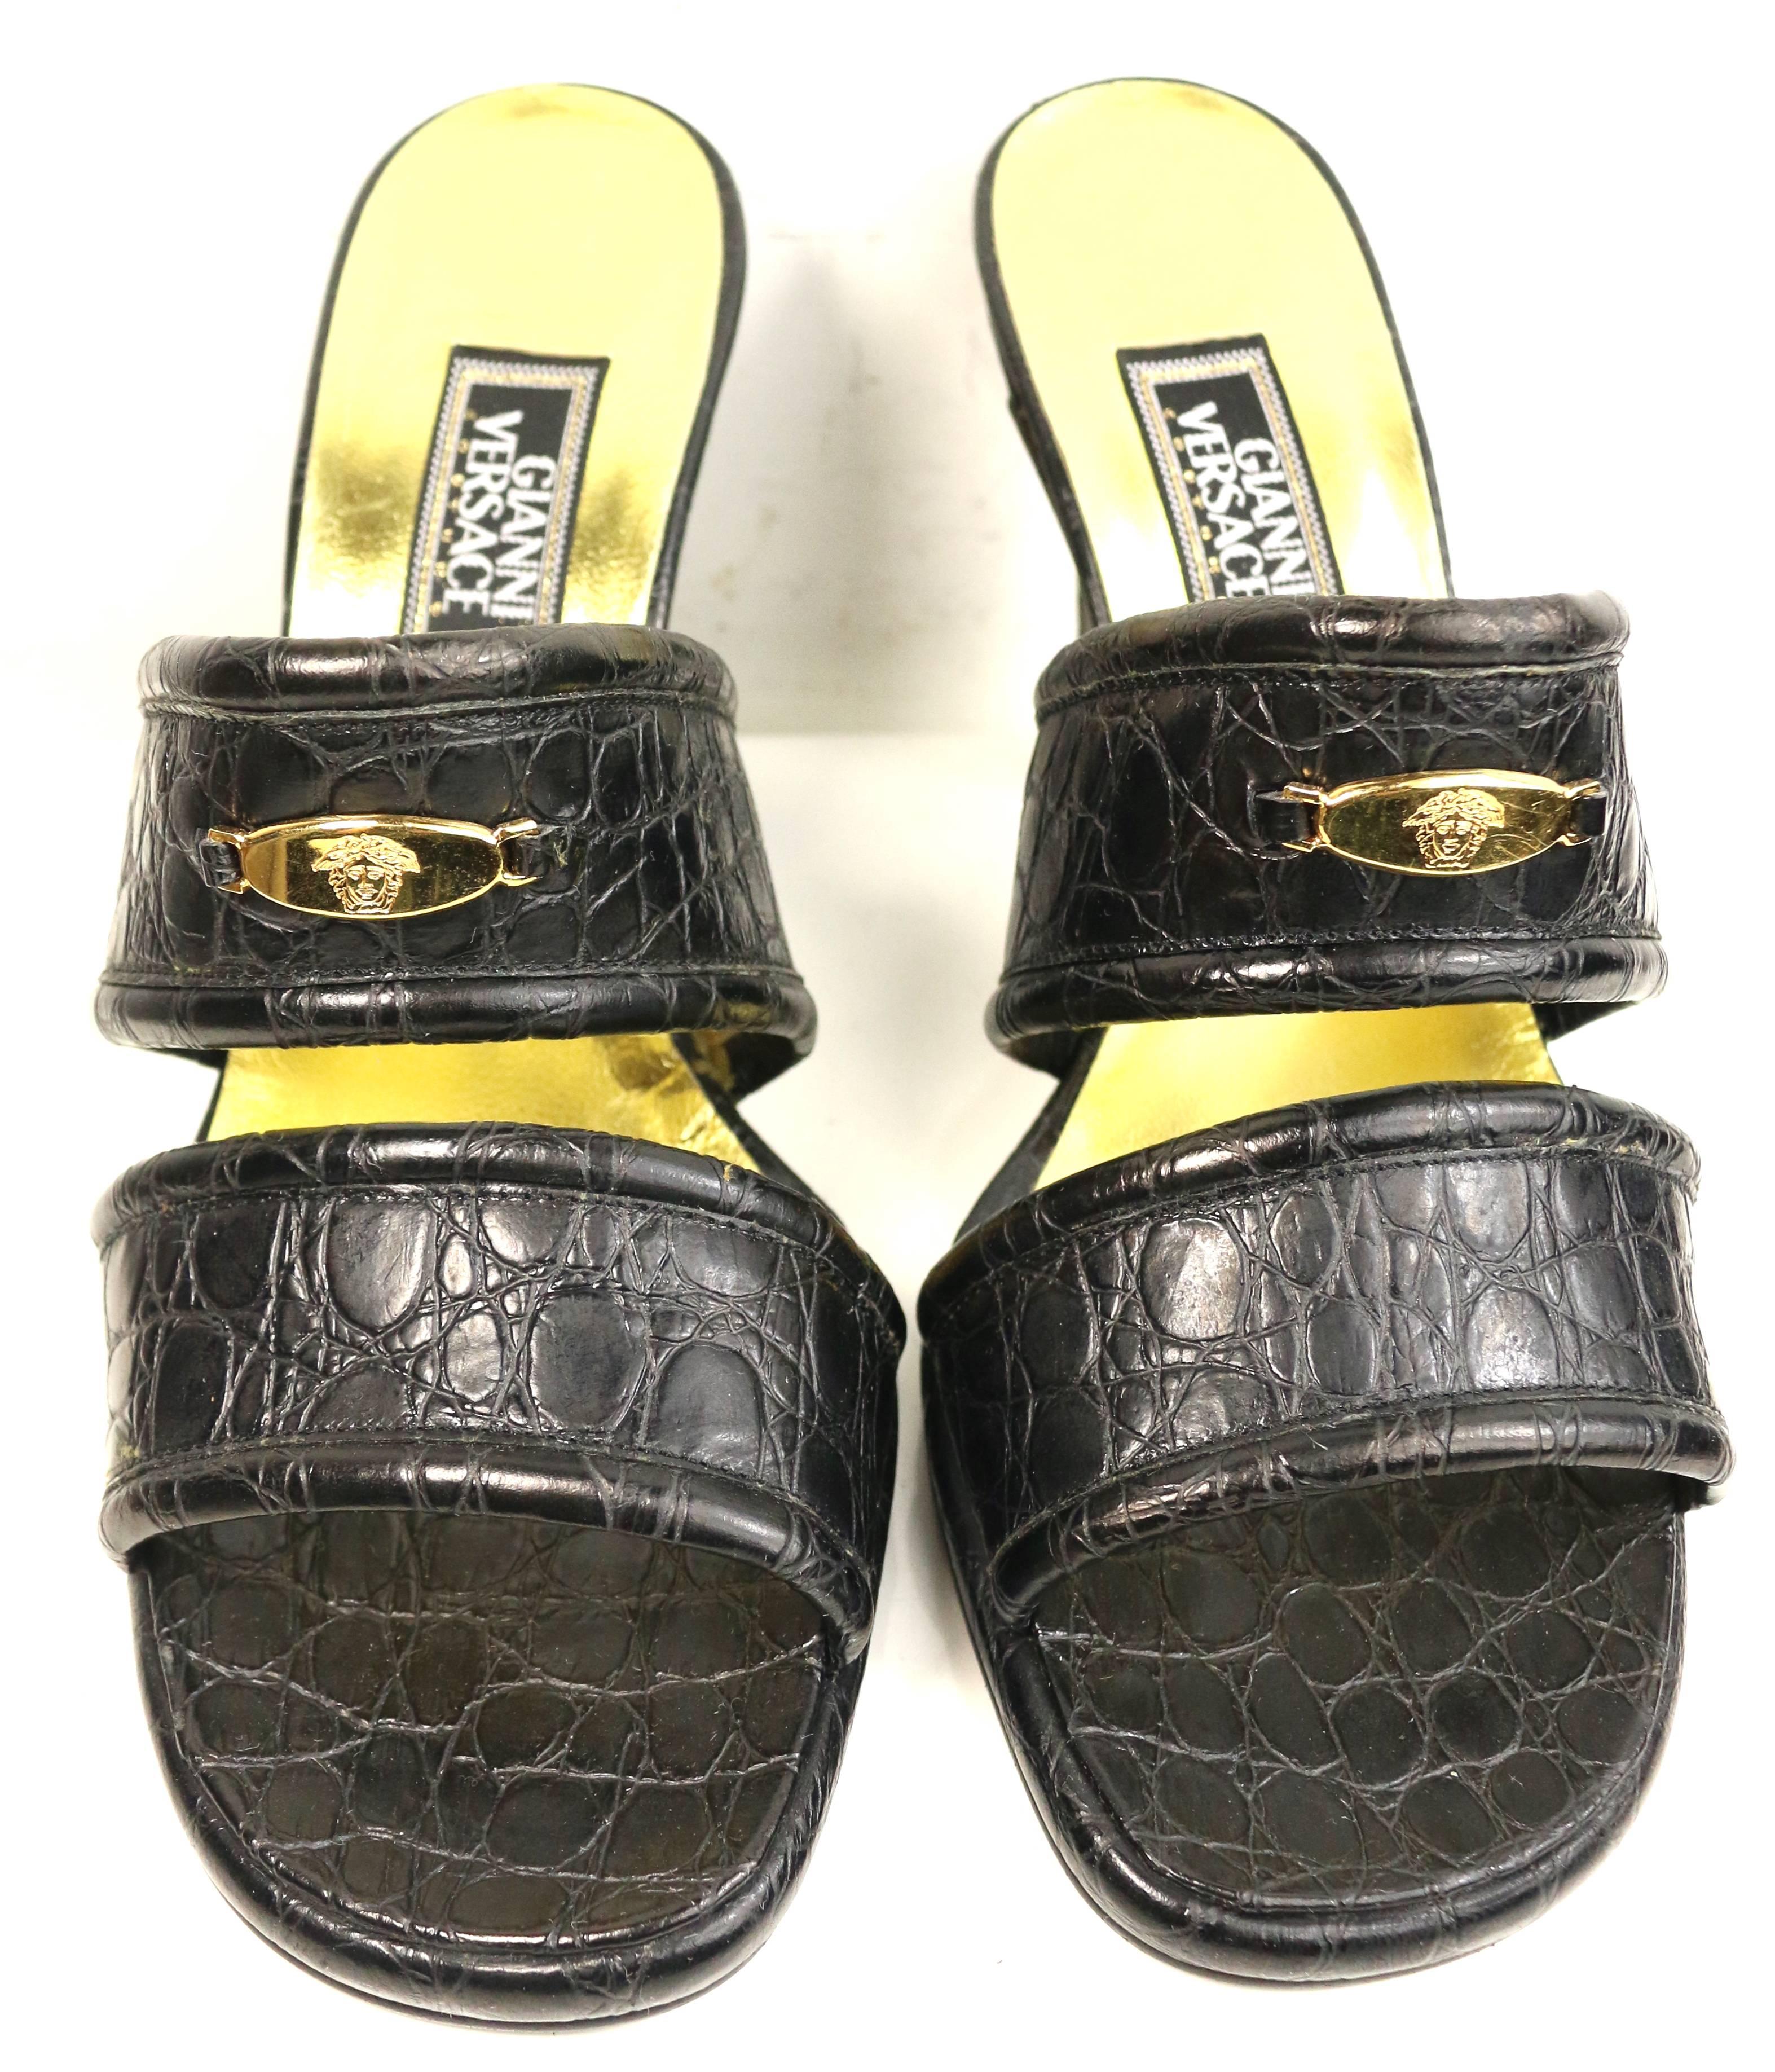 - Vintage 90s Gianni Versace Couture black croc leather sandals heels. 

- Gold Medusa metal hardware embedded in front. 

- Made in Italy. 

- Size 38. 